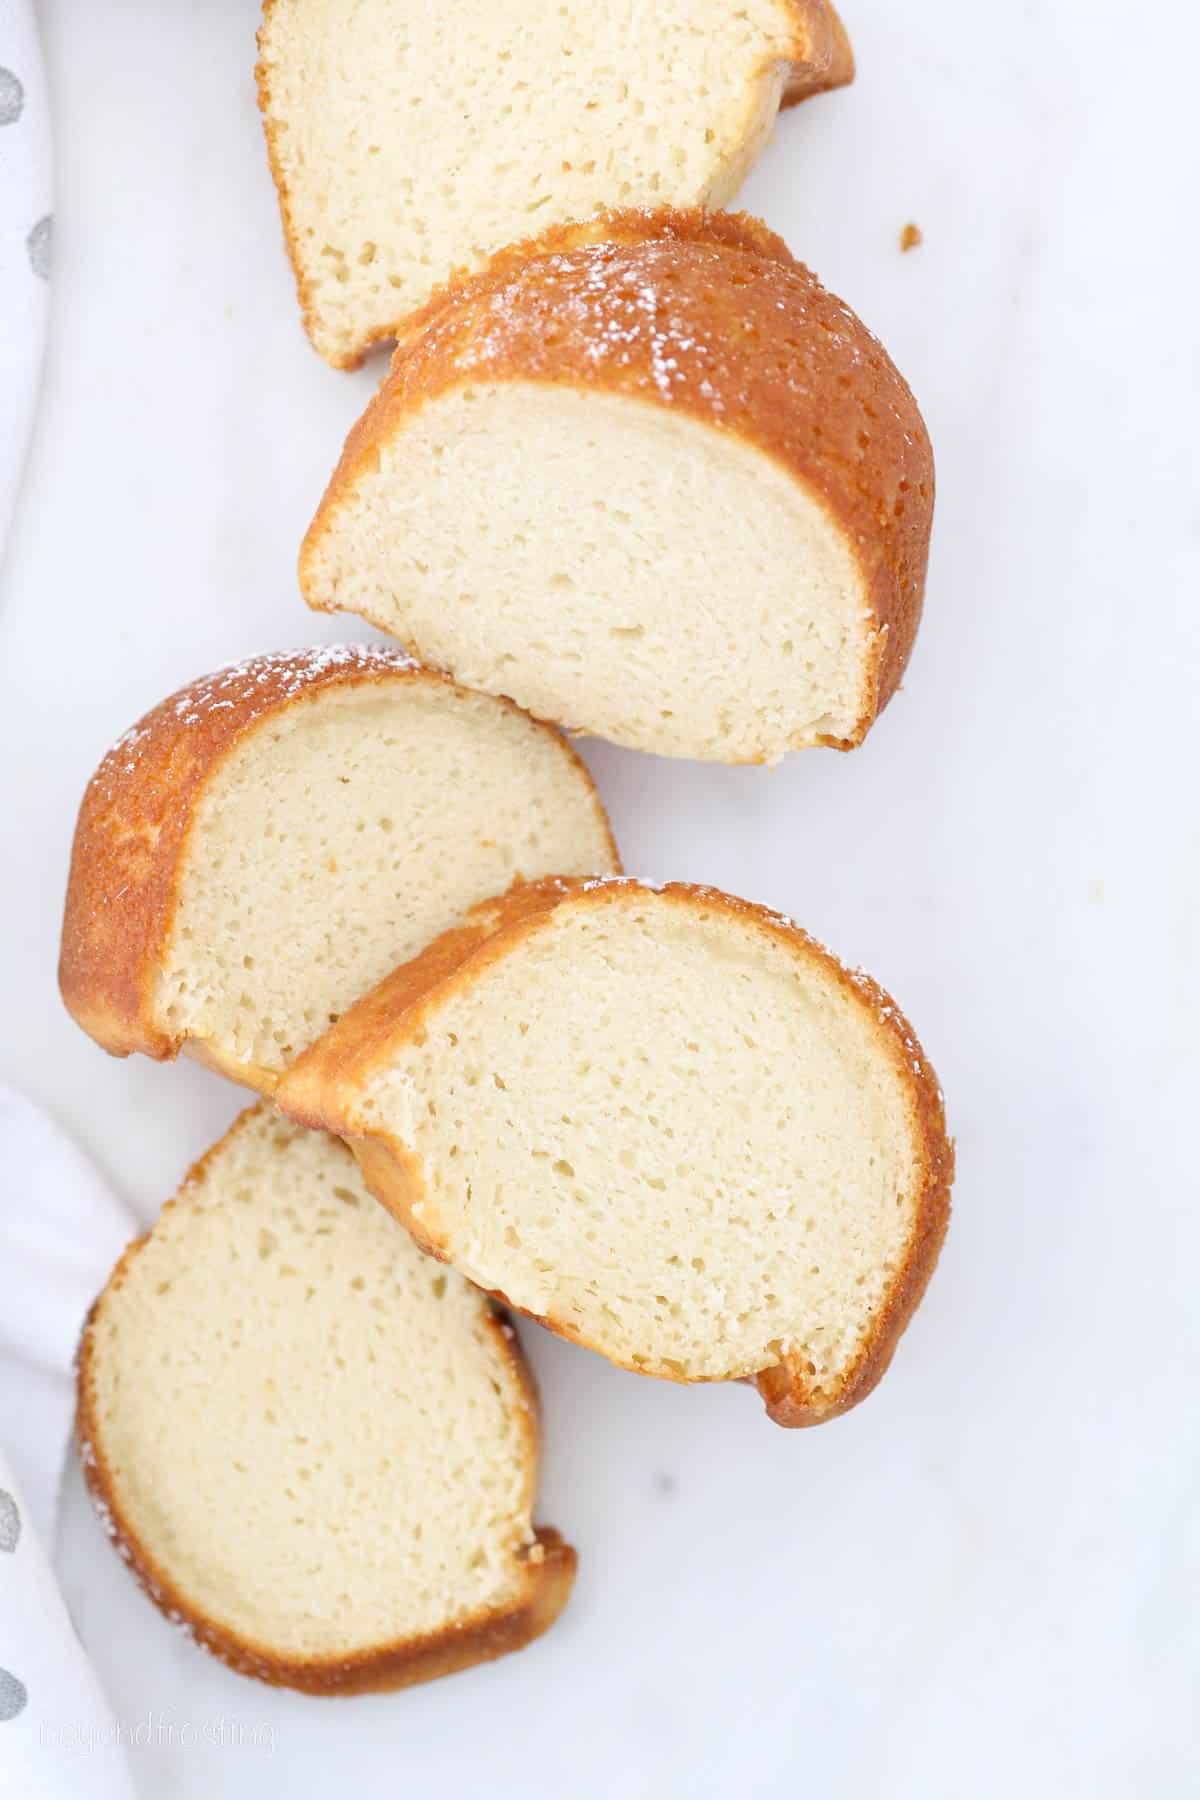 Overhead view of slices of vanilla bundt cake on a white surface.